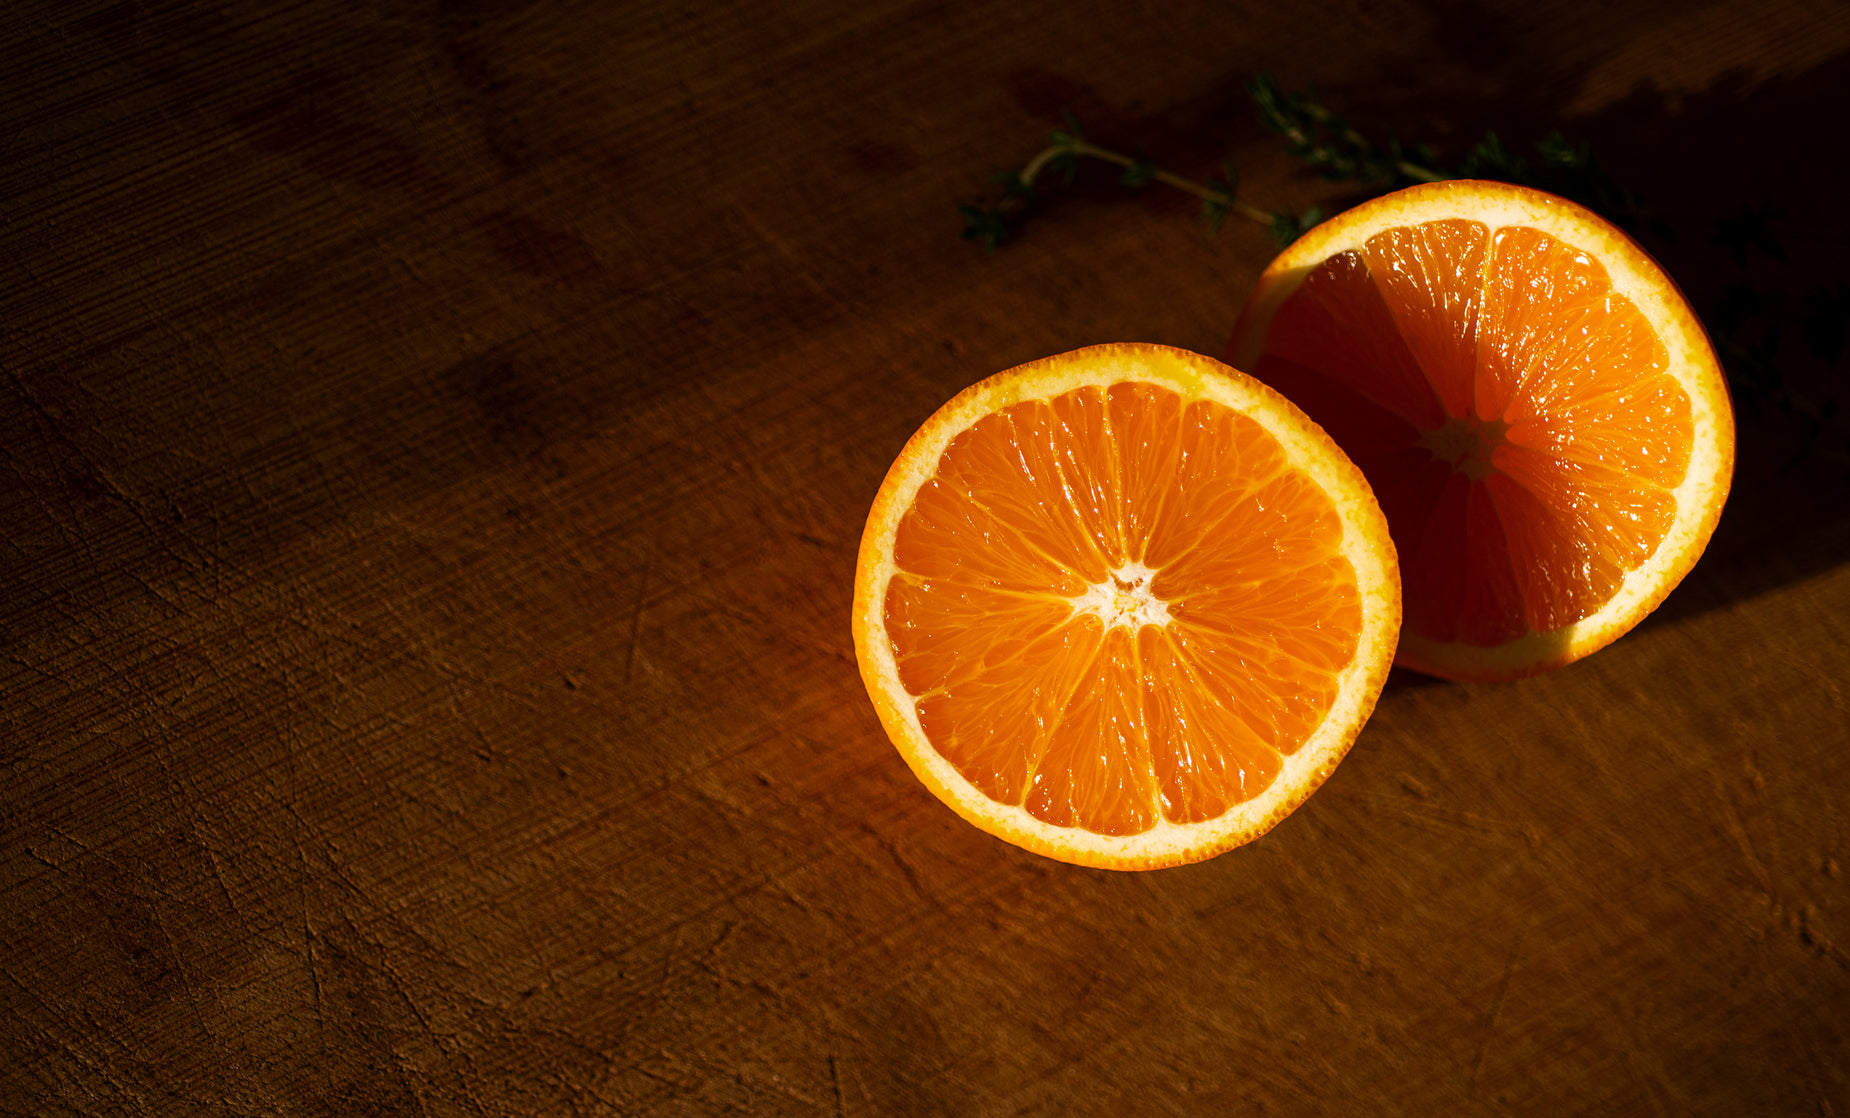 an orange is sliced in half on a wooden surface